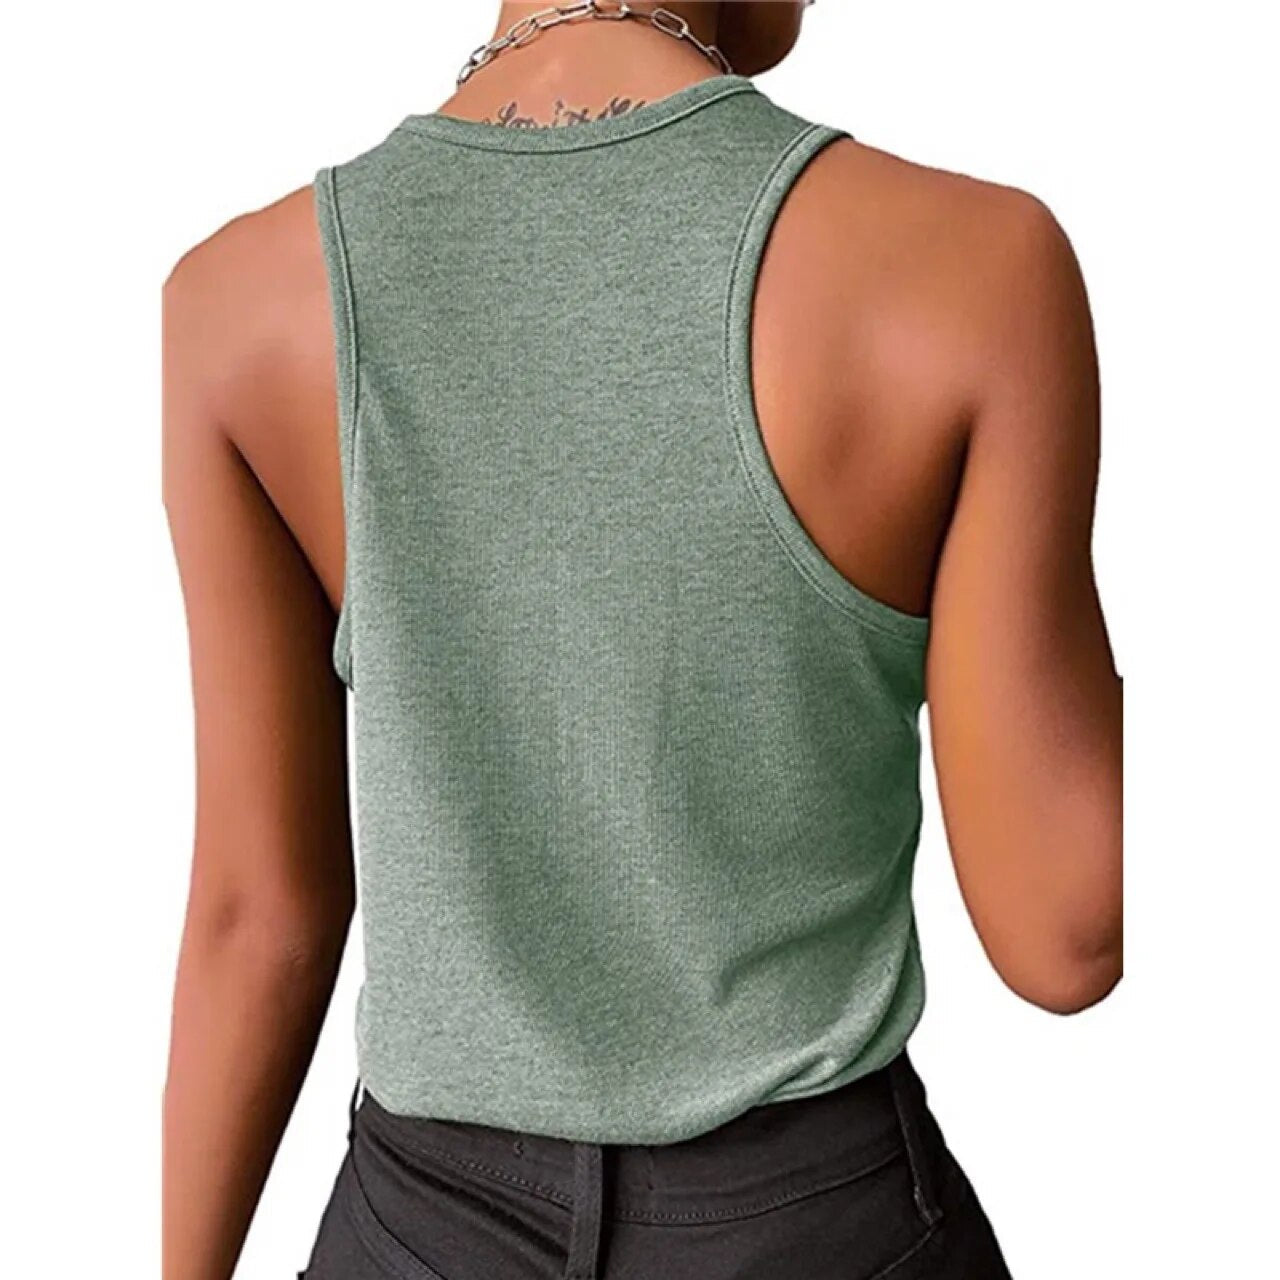 xakxx xakxx- Large Size Basic Screw Thread Tank Top Female Button Fit Sleeveless Top Casual Solid Slim Vest Women Simple Tanks T-Shirt